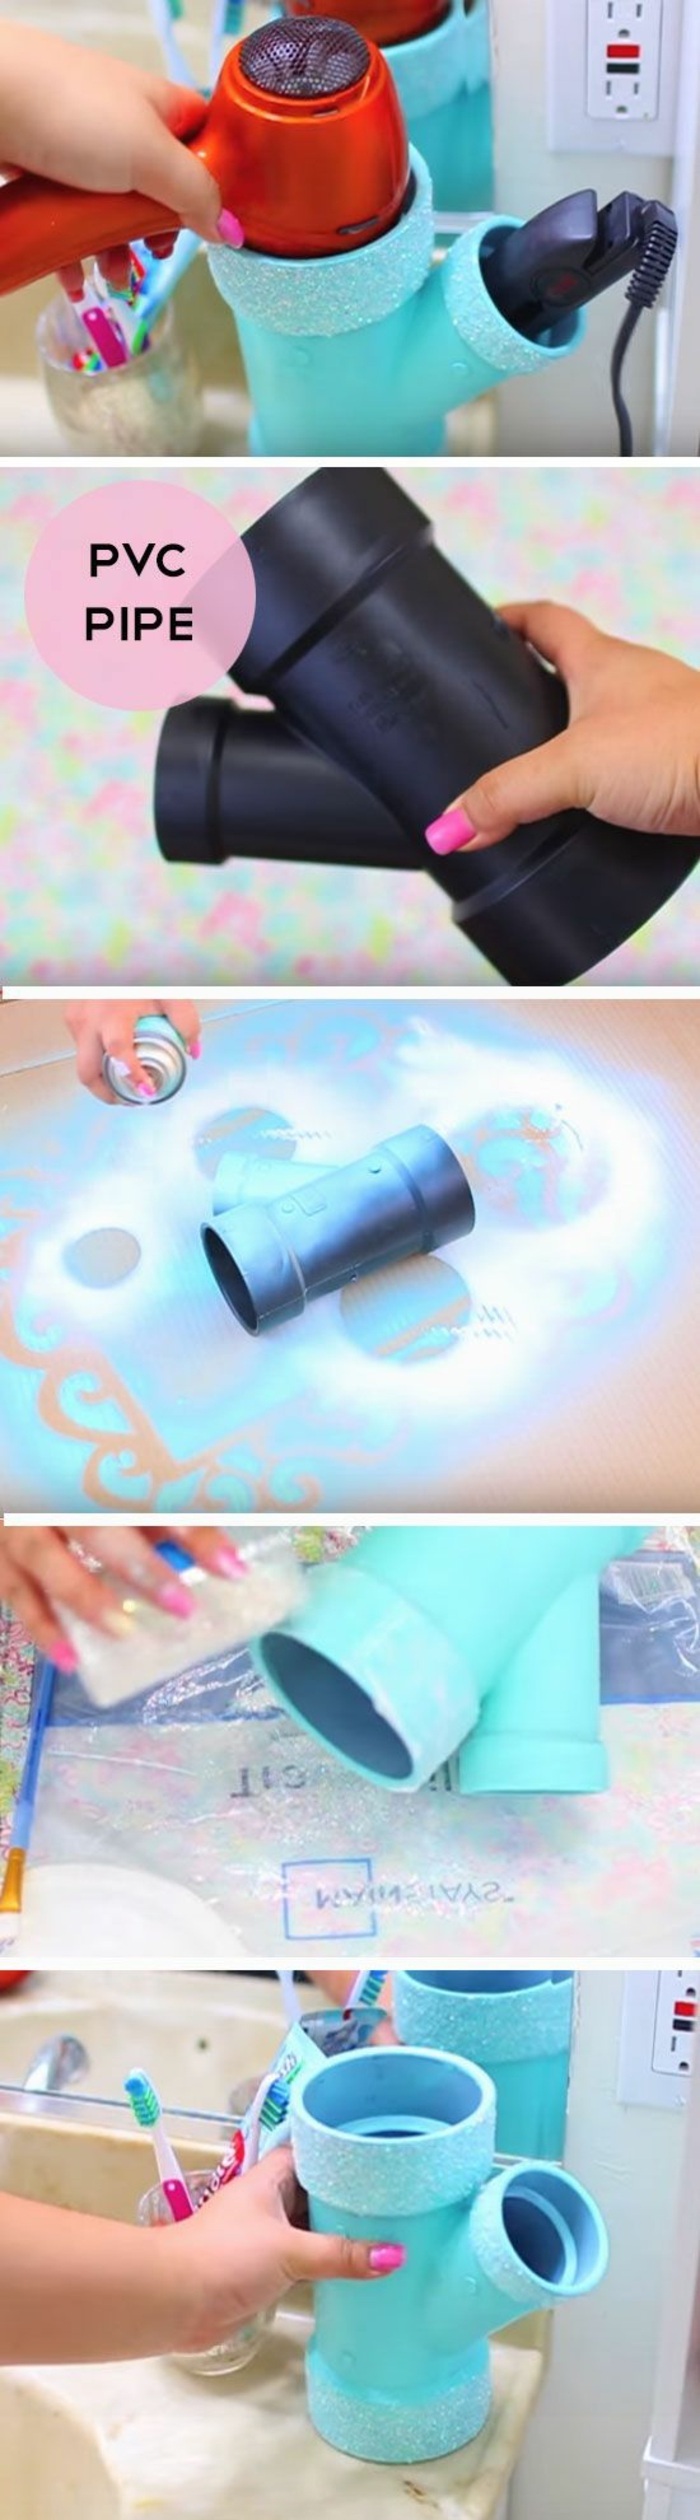 pvc pipe, painted in turquoise, fun diy projects, straightener and blow drier inside